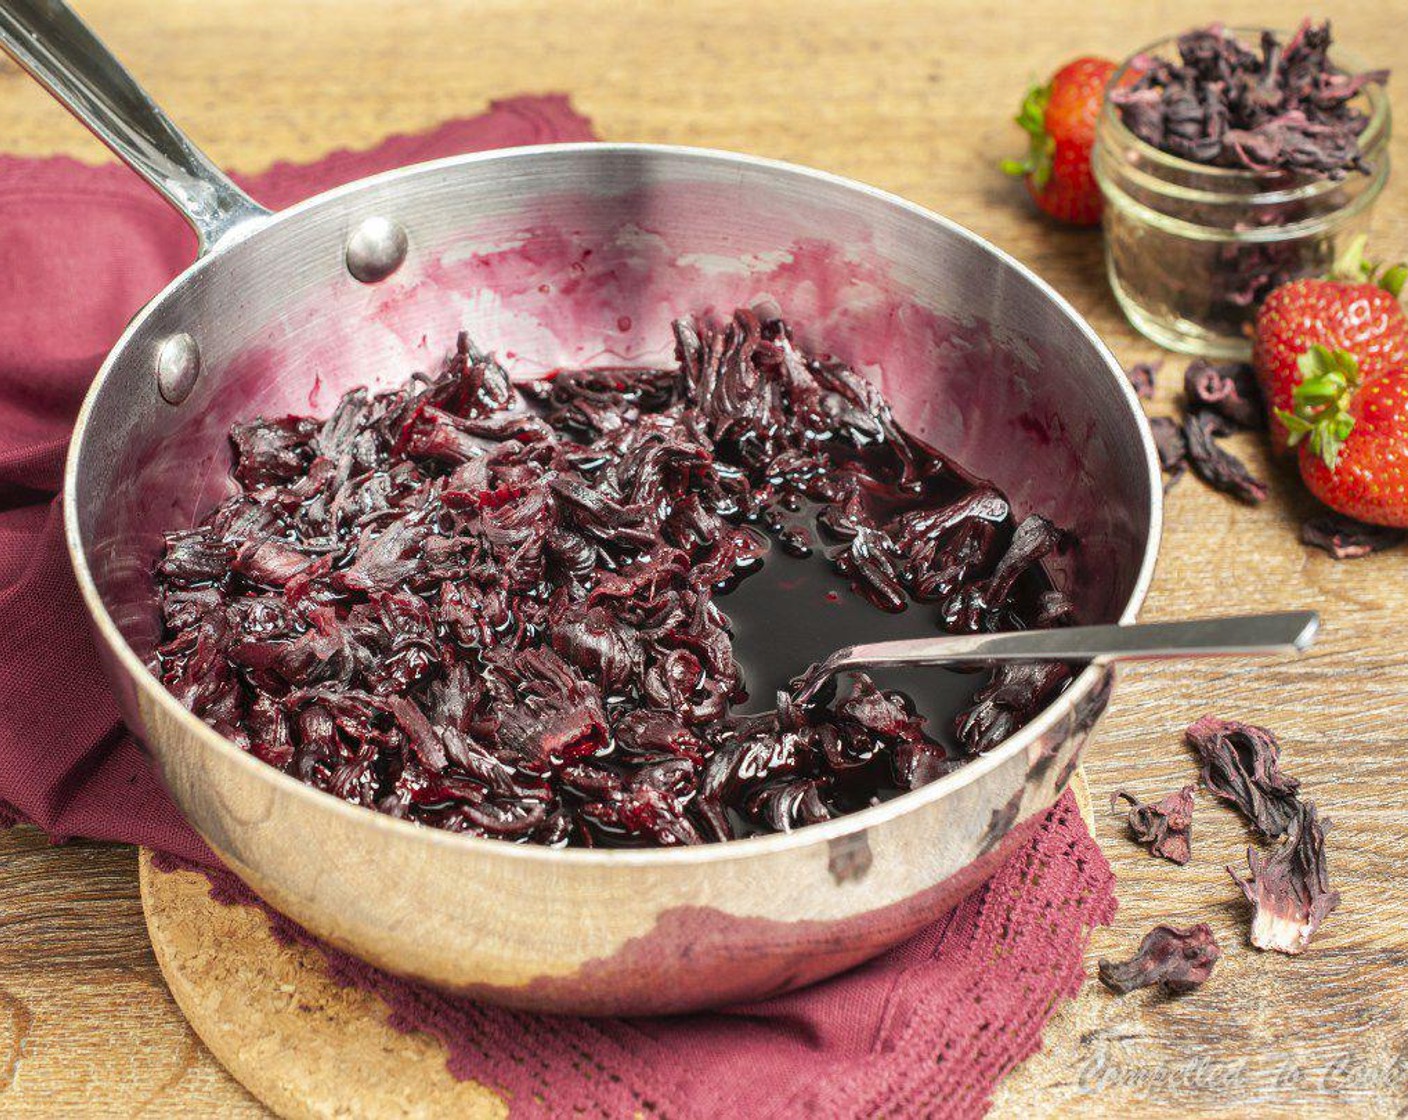 step 1 In a medium saucepan bring Water (1 1/2 cup) to a simmer. Add Dried Hibiscus Flowers (3/4 cup) and bring back to a boil, stirring to soak all the hibiscus. Turn off heat and allow to steep for 10 to 15 minutes, stirring once or twice.